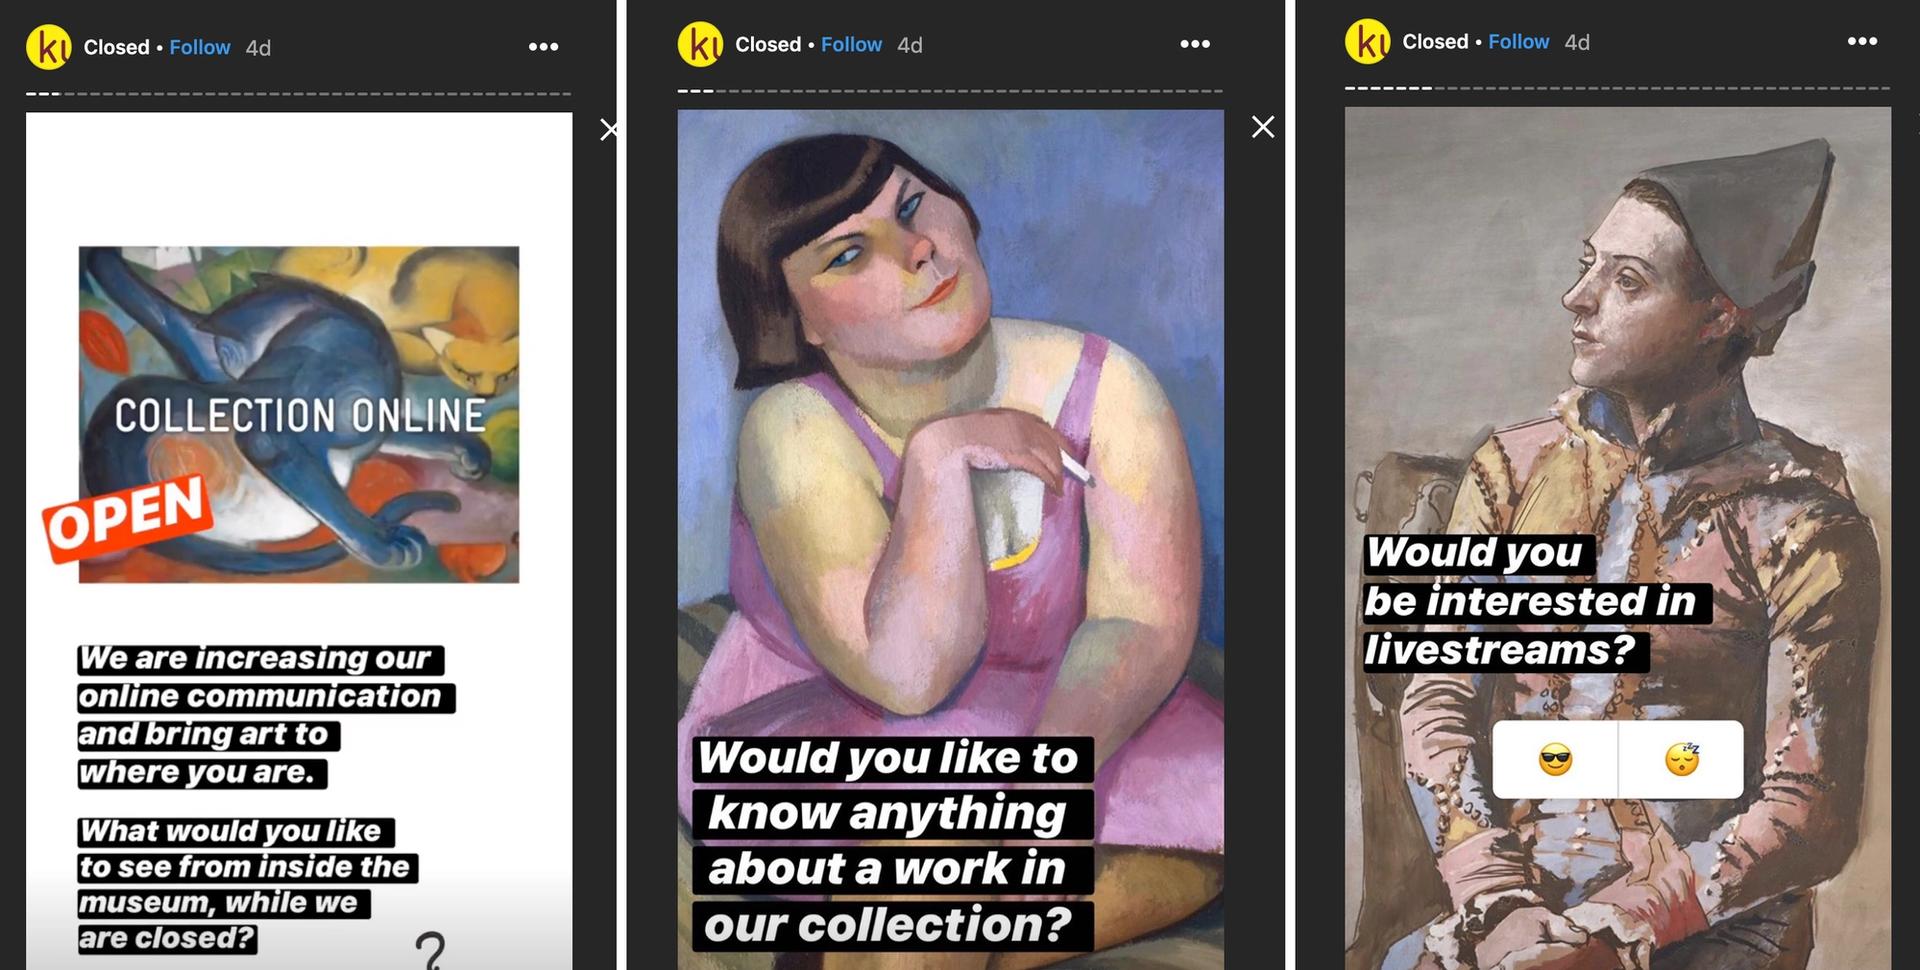 Screenshots from Kunstmuseum Basel's Instagram page asking followers what kind of content they want to see online. Courtesy of Kunstmuseum Basel Screenshots from Kunstmuseum Basel's Instagram page asking followers what kind of content they want to see online. Courtesy of Kunstmuseum Basel